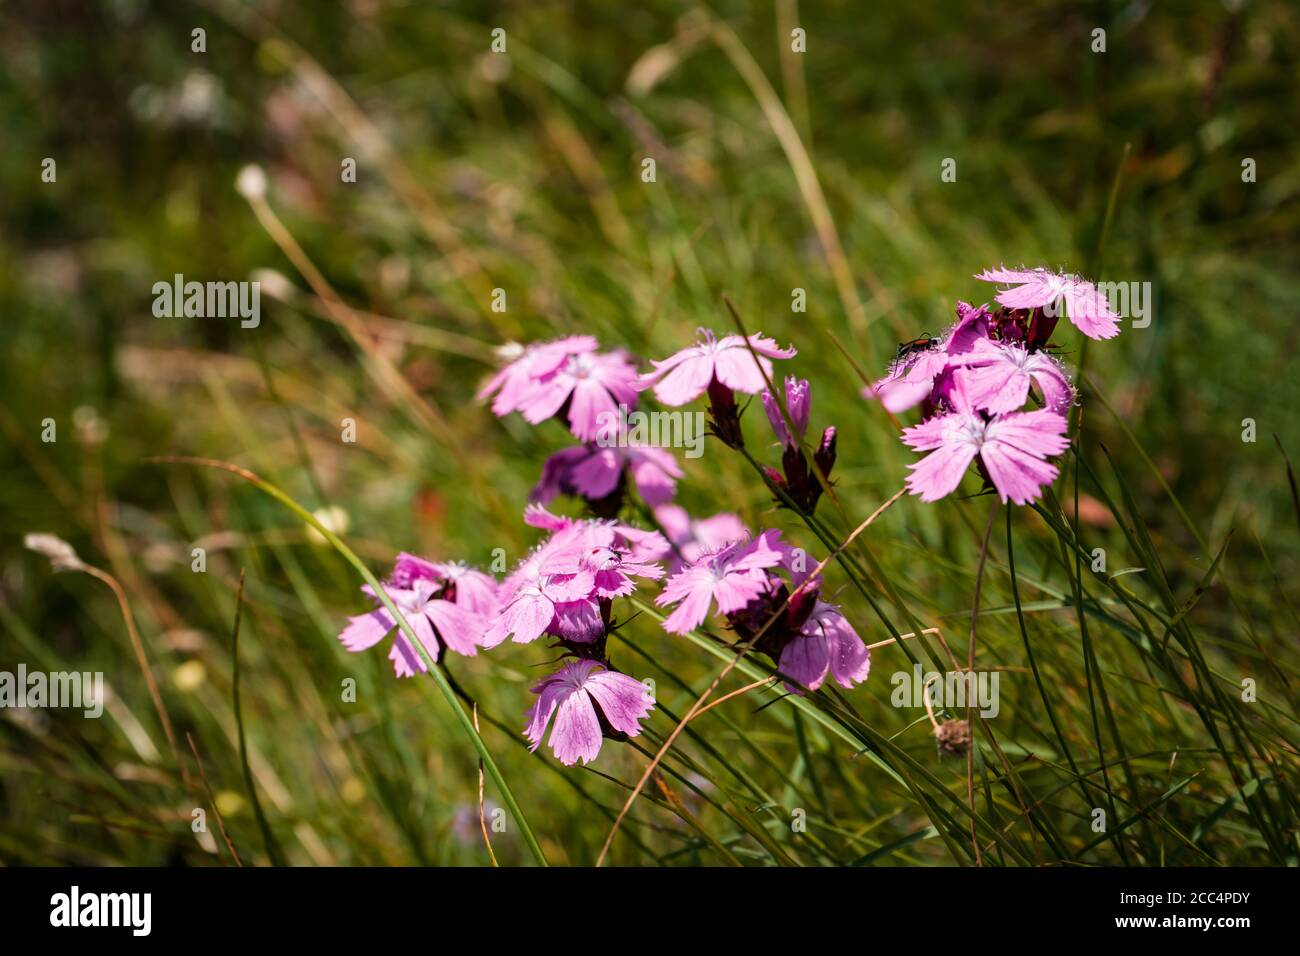 Closeup shot of wild carnations in a forest Stock Photo